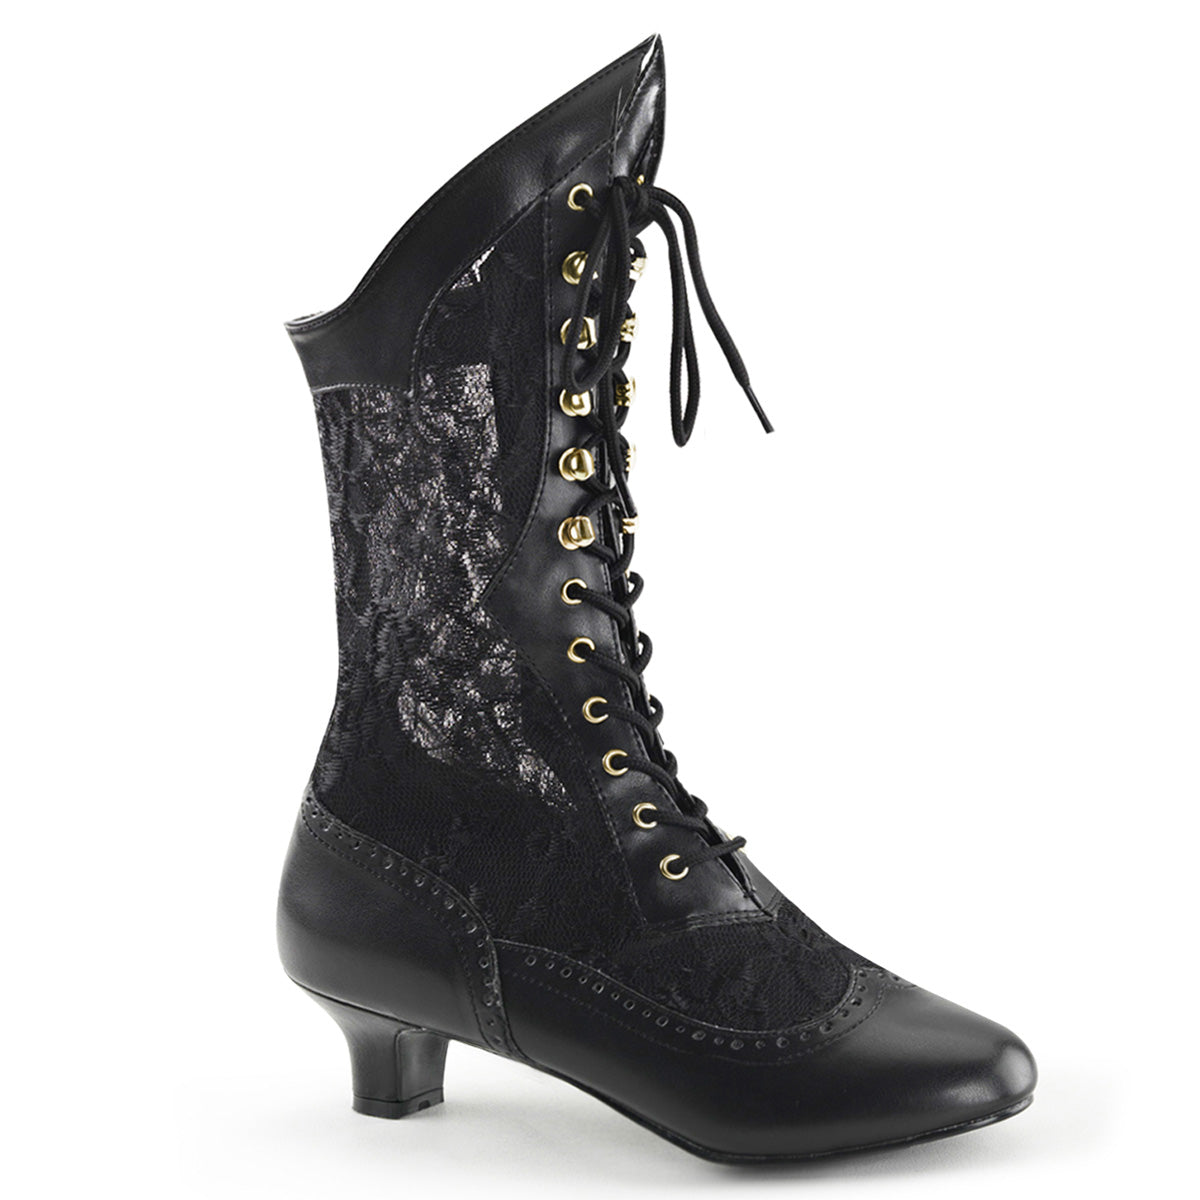 DAME-115 Black Ankle Boots